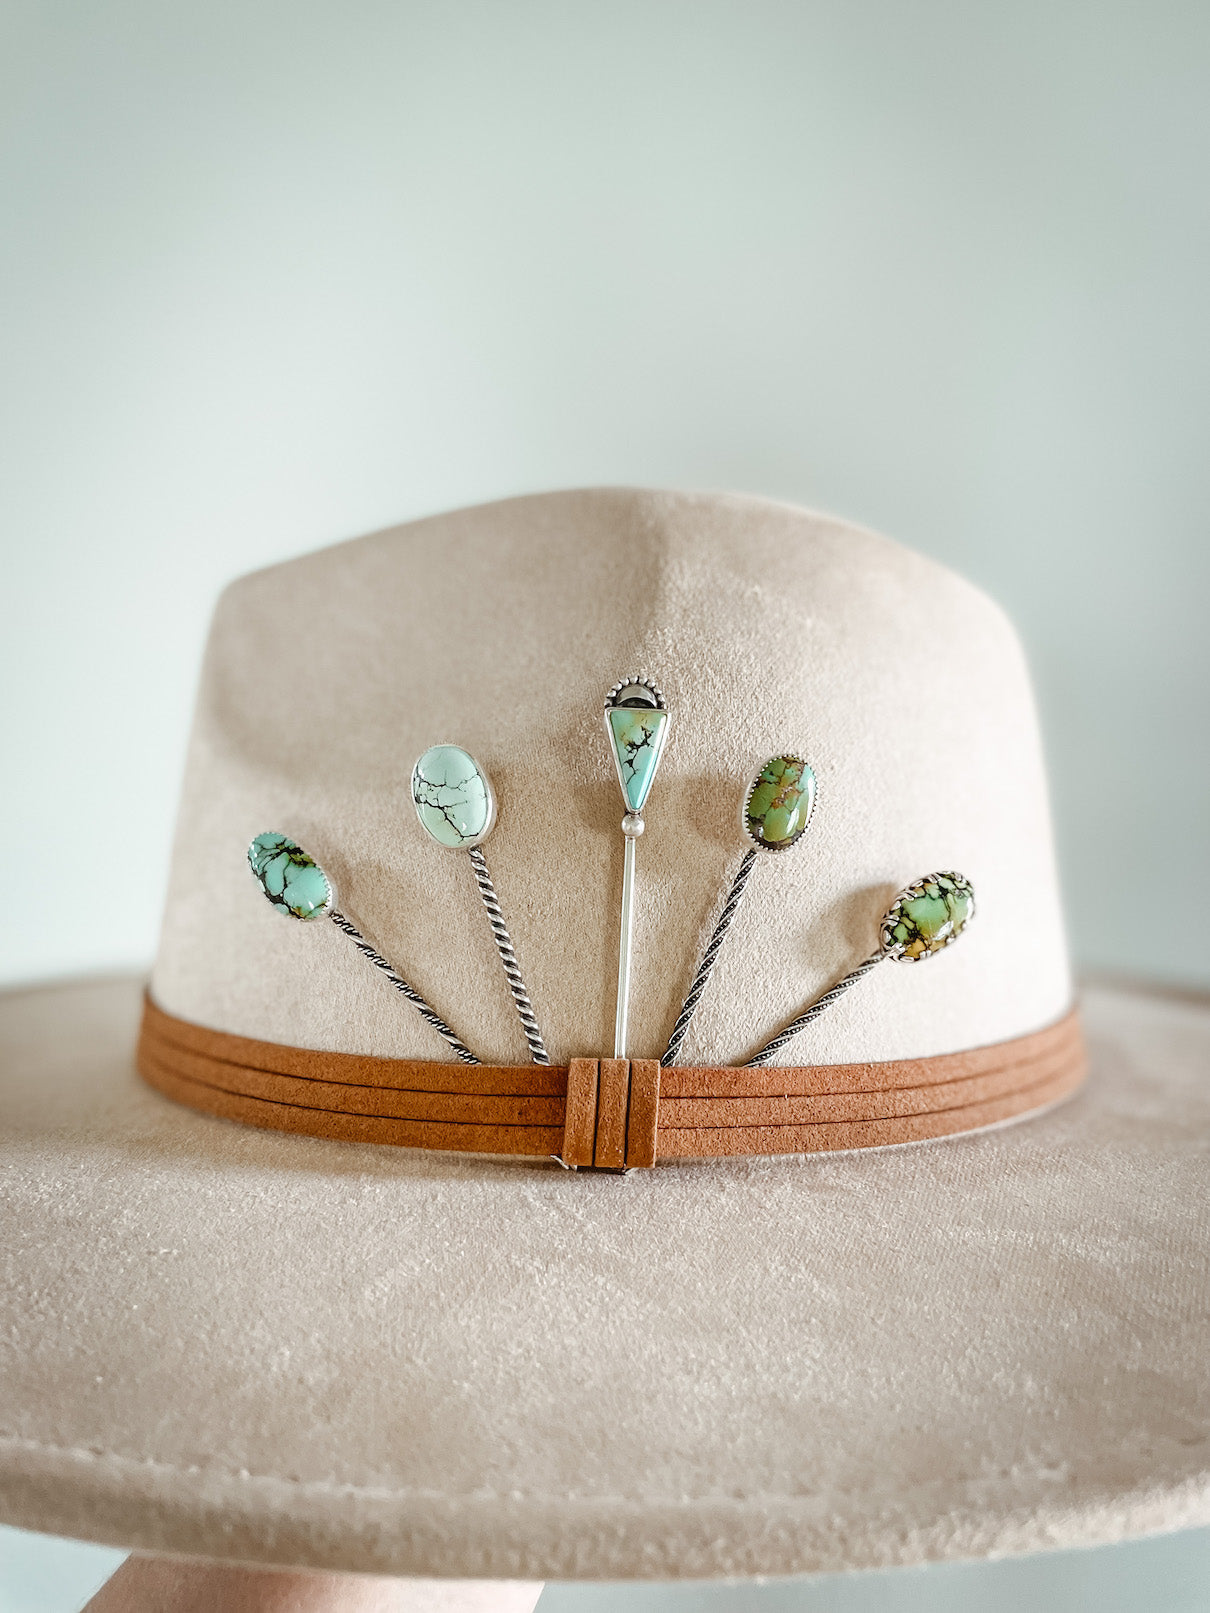 Five light blue or green turquoise stick hat pins arranged behind hatband on hat.